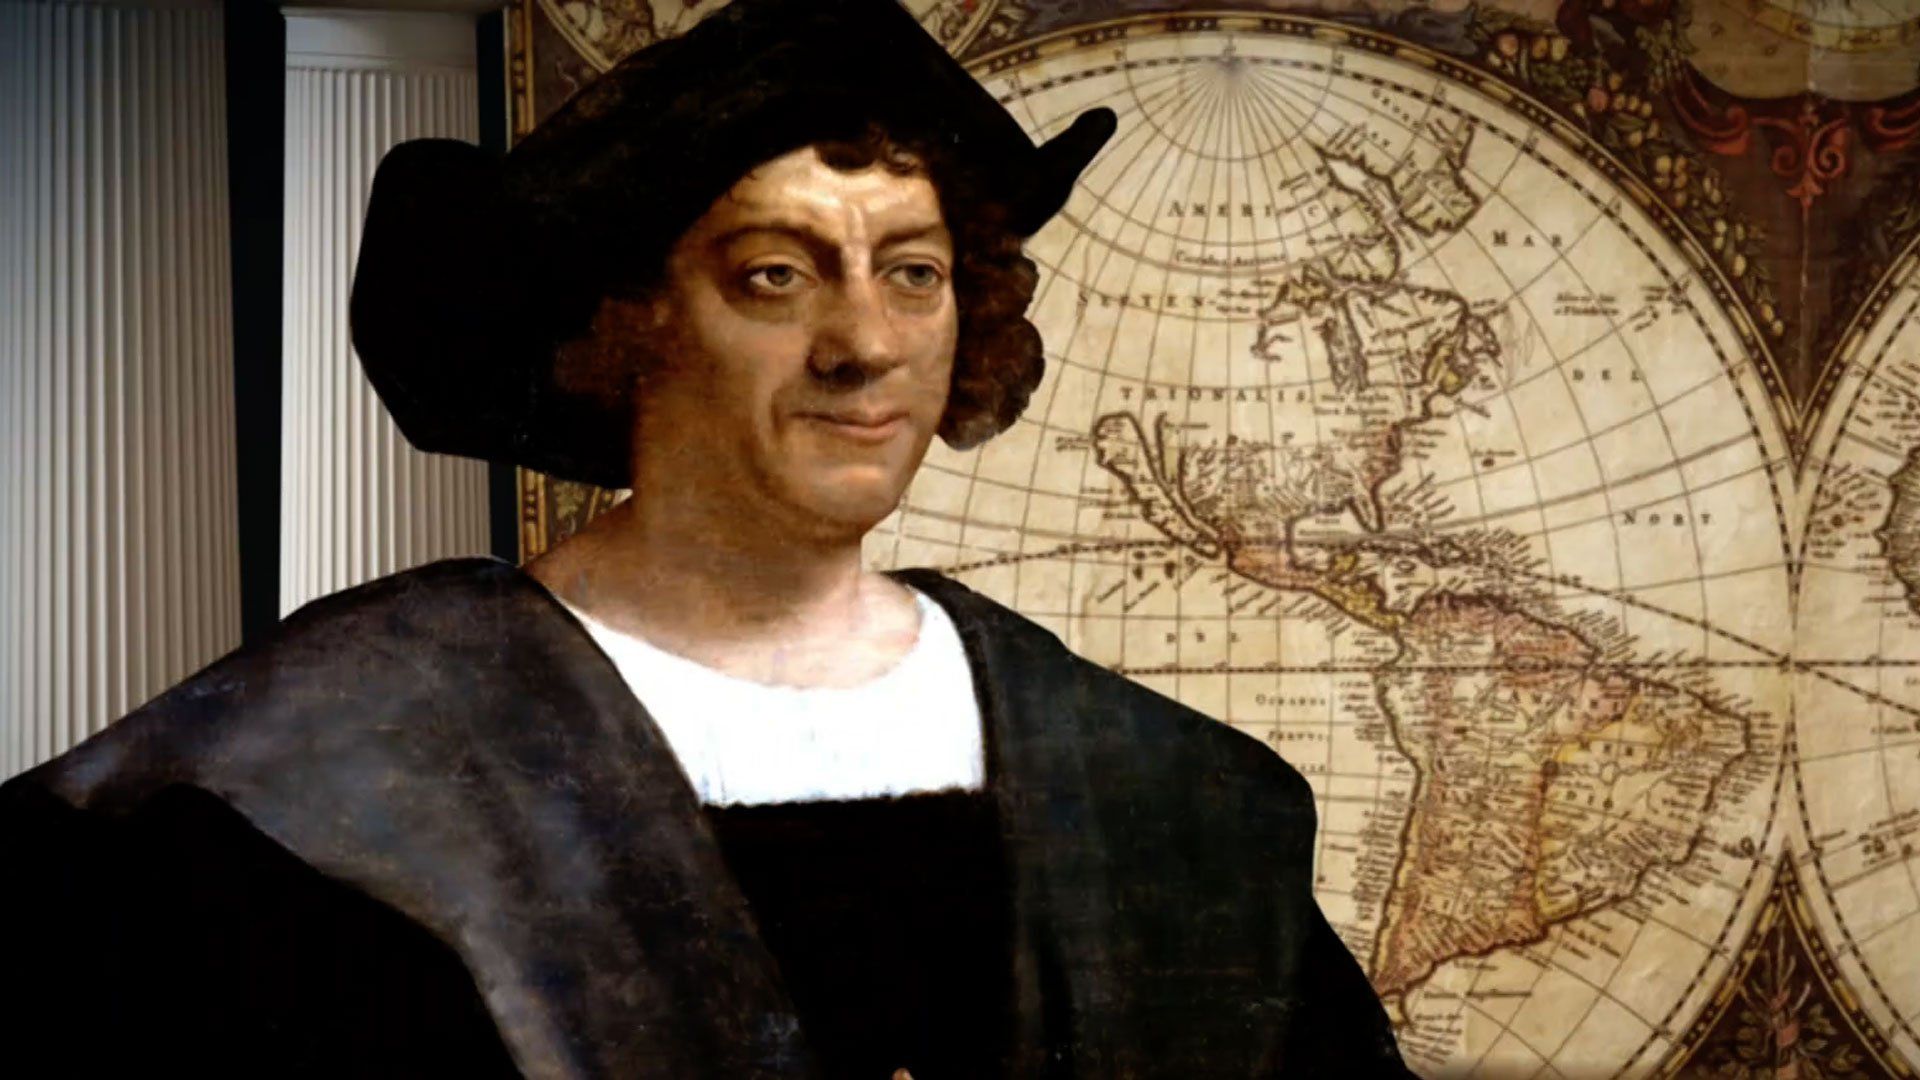 THE CASE FOR COLUMBUS DAY